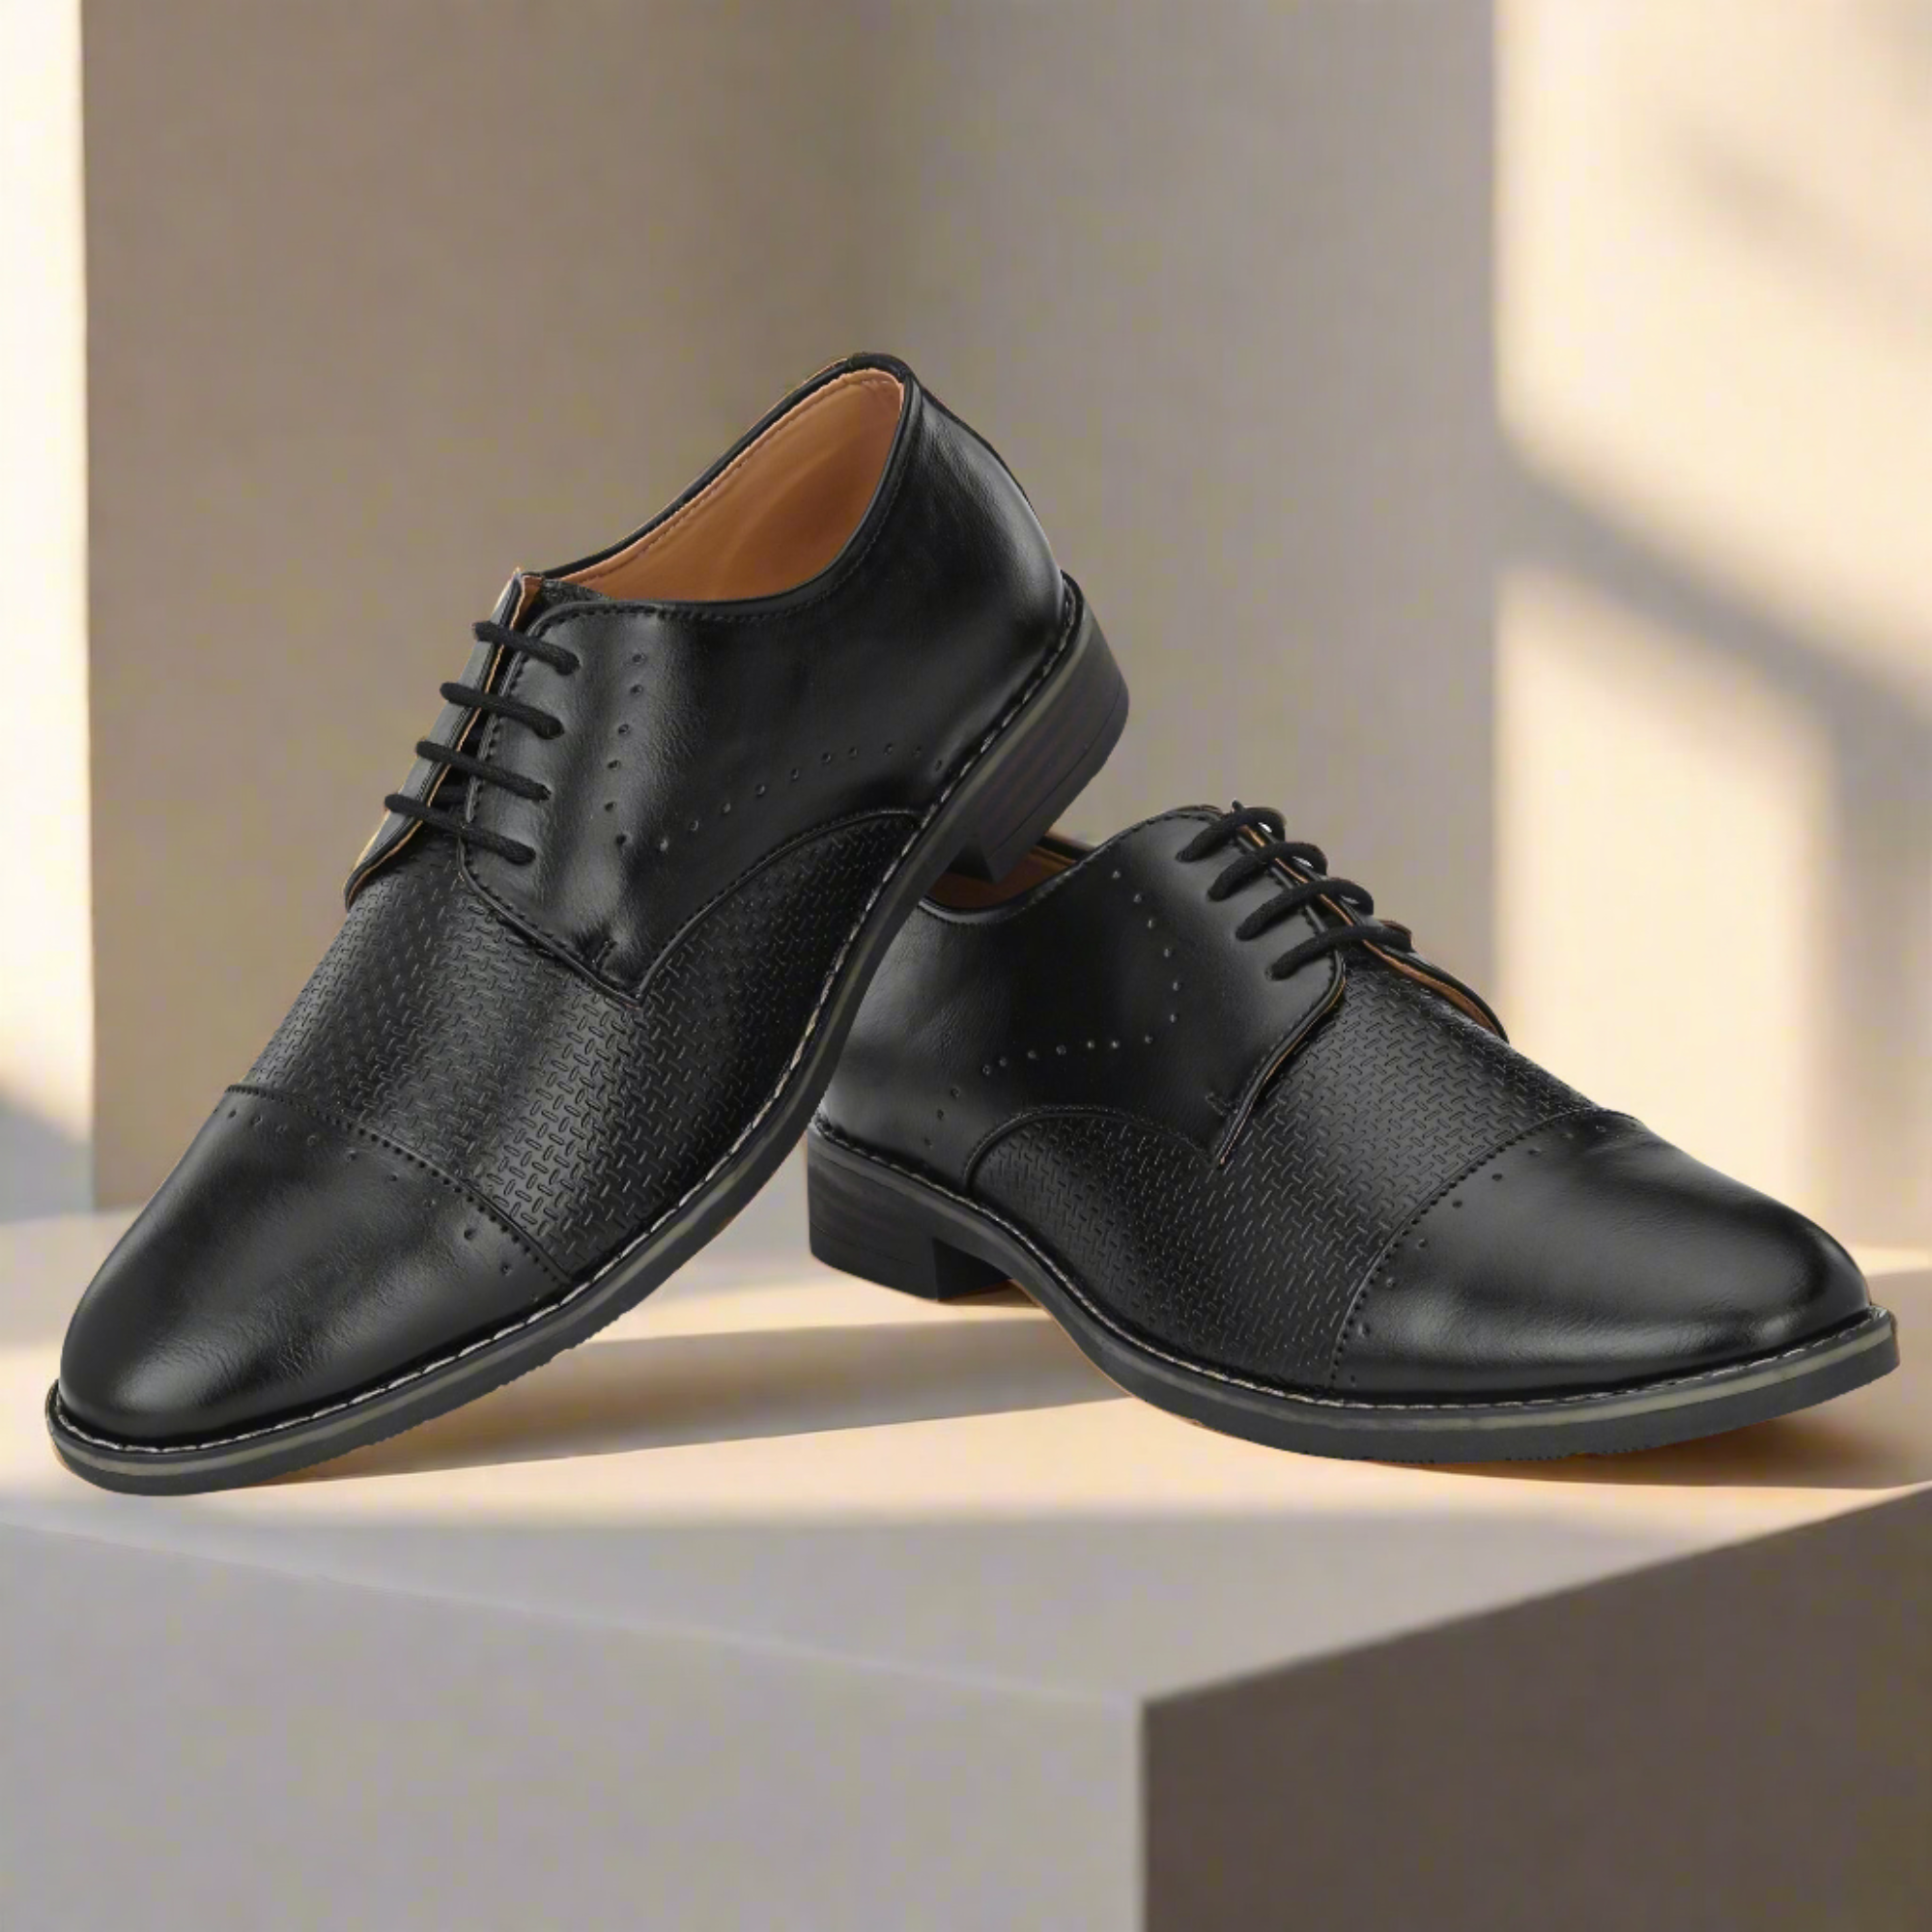 Attitudist Unisex Handcrafted Derby Matte Black Formal Lace-up Shoes With Cap Toe And Textured Design